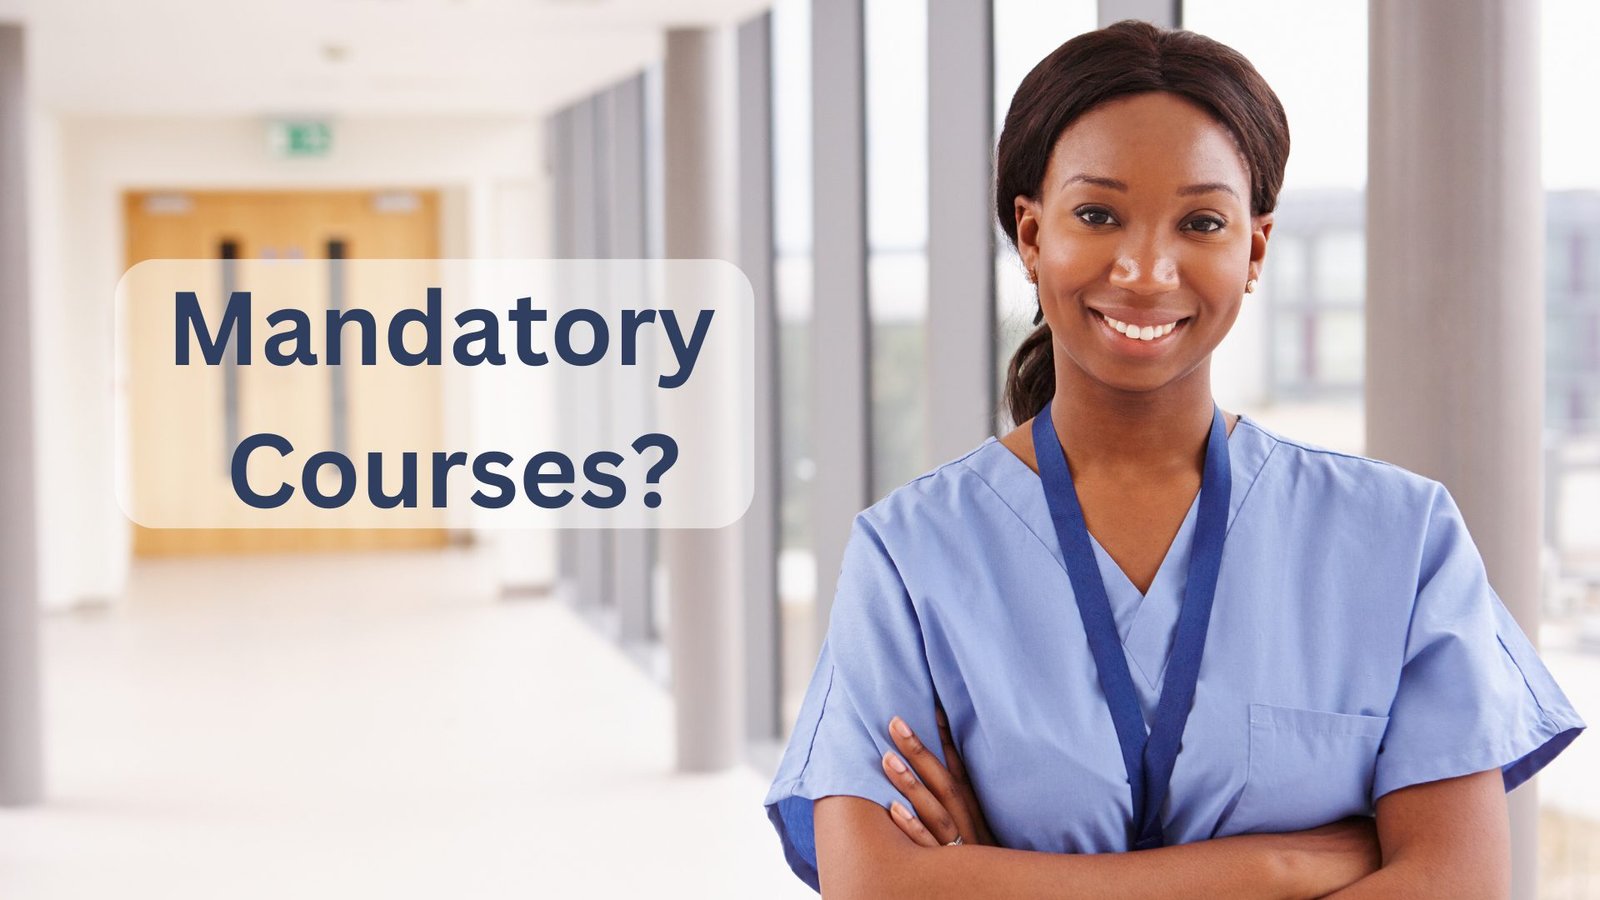 what are the mandatory courses in the healthcare industry